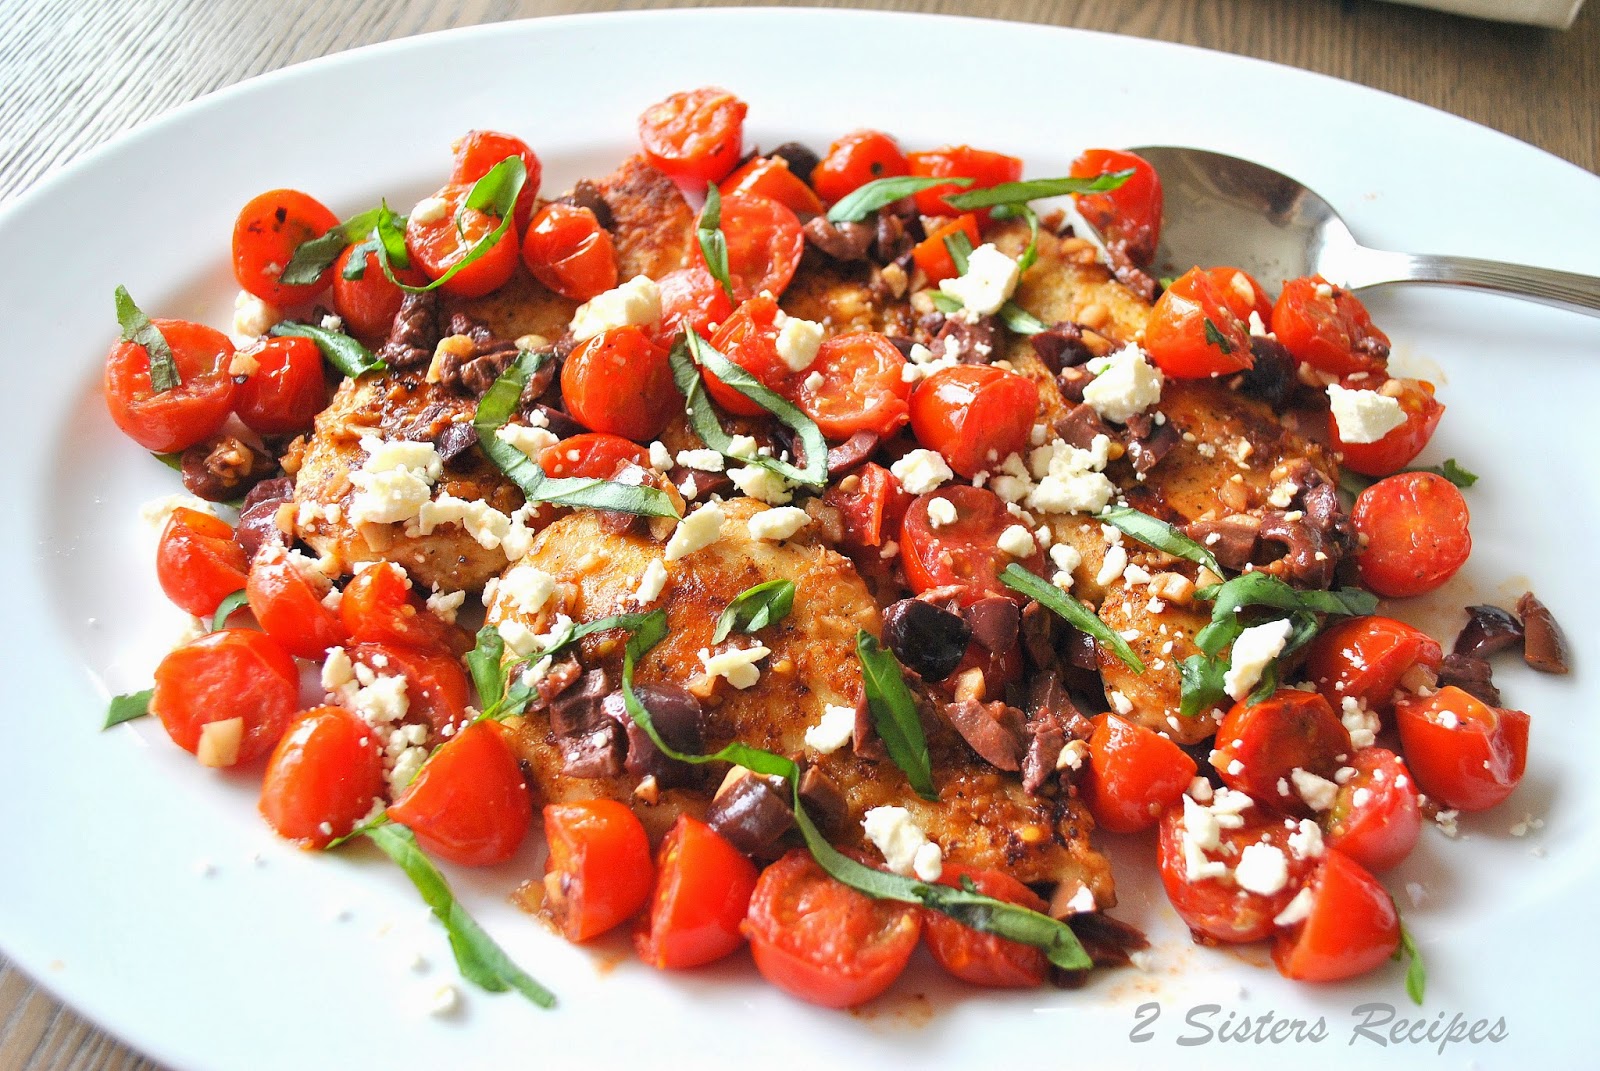 Sauteed Chicken Cutlets with Cherry Tomatoes, Feta, Olives and Basil by 2sistersrecipes.com